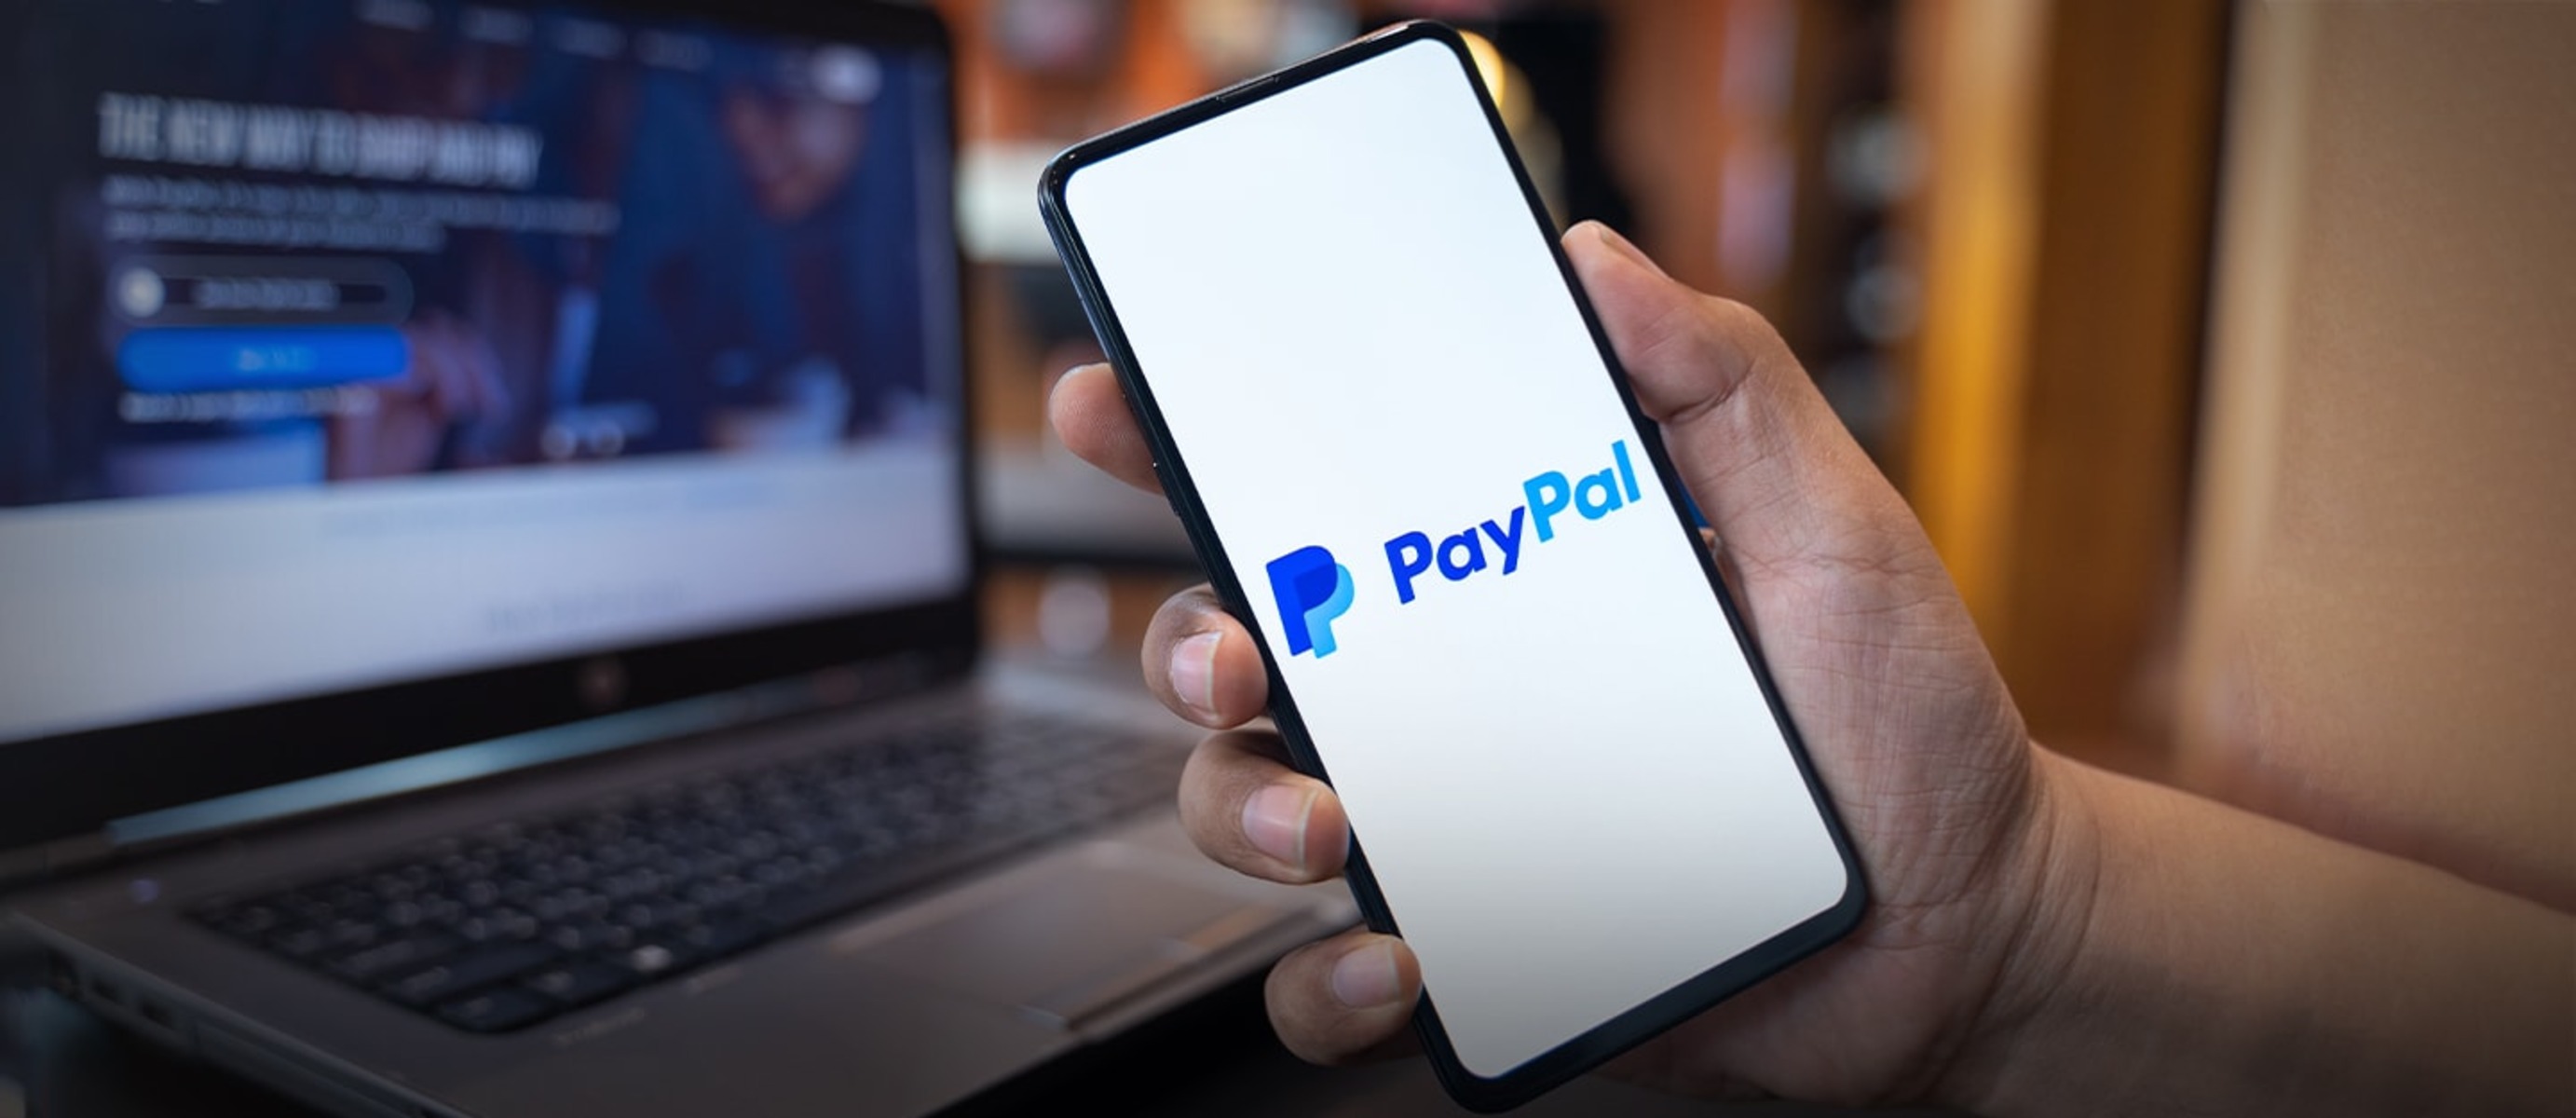 what-money-transfer-is-faster-through-paypal